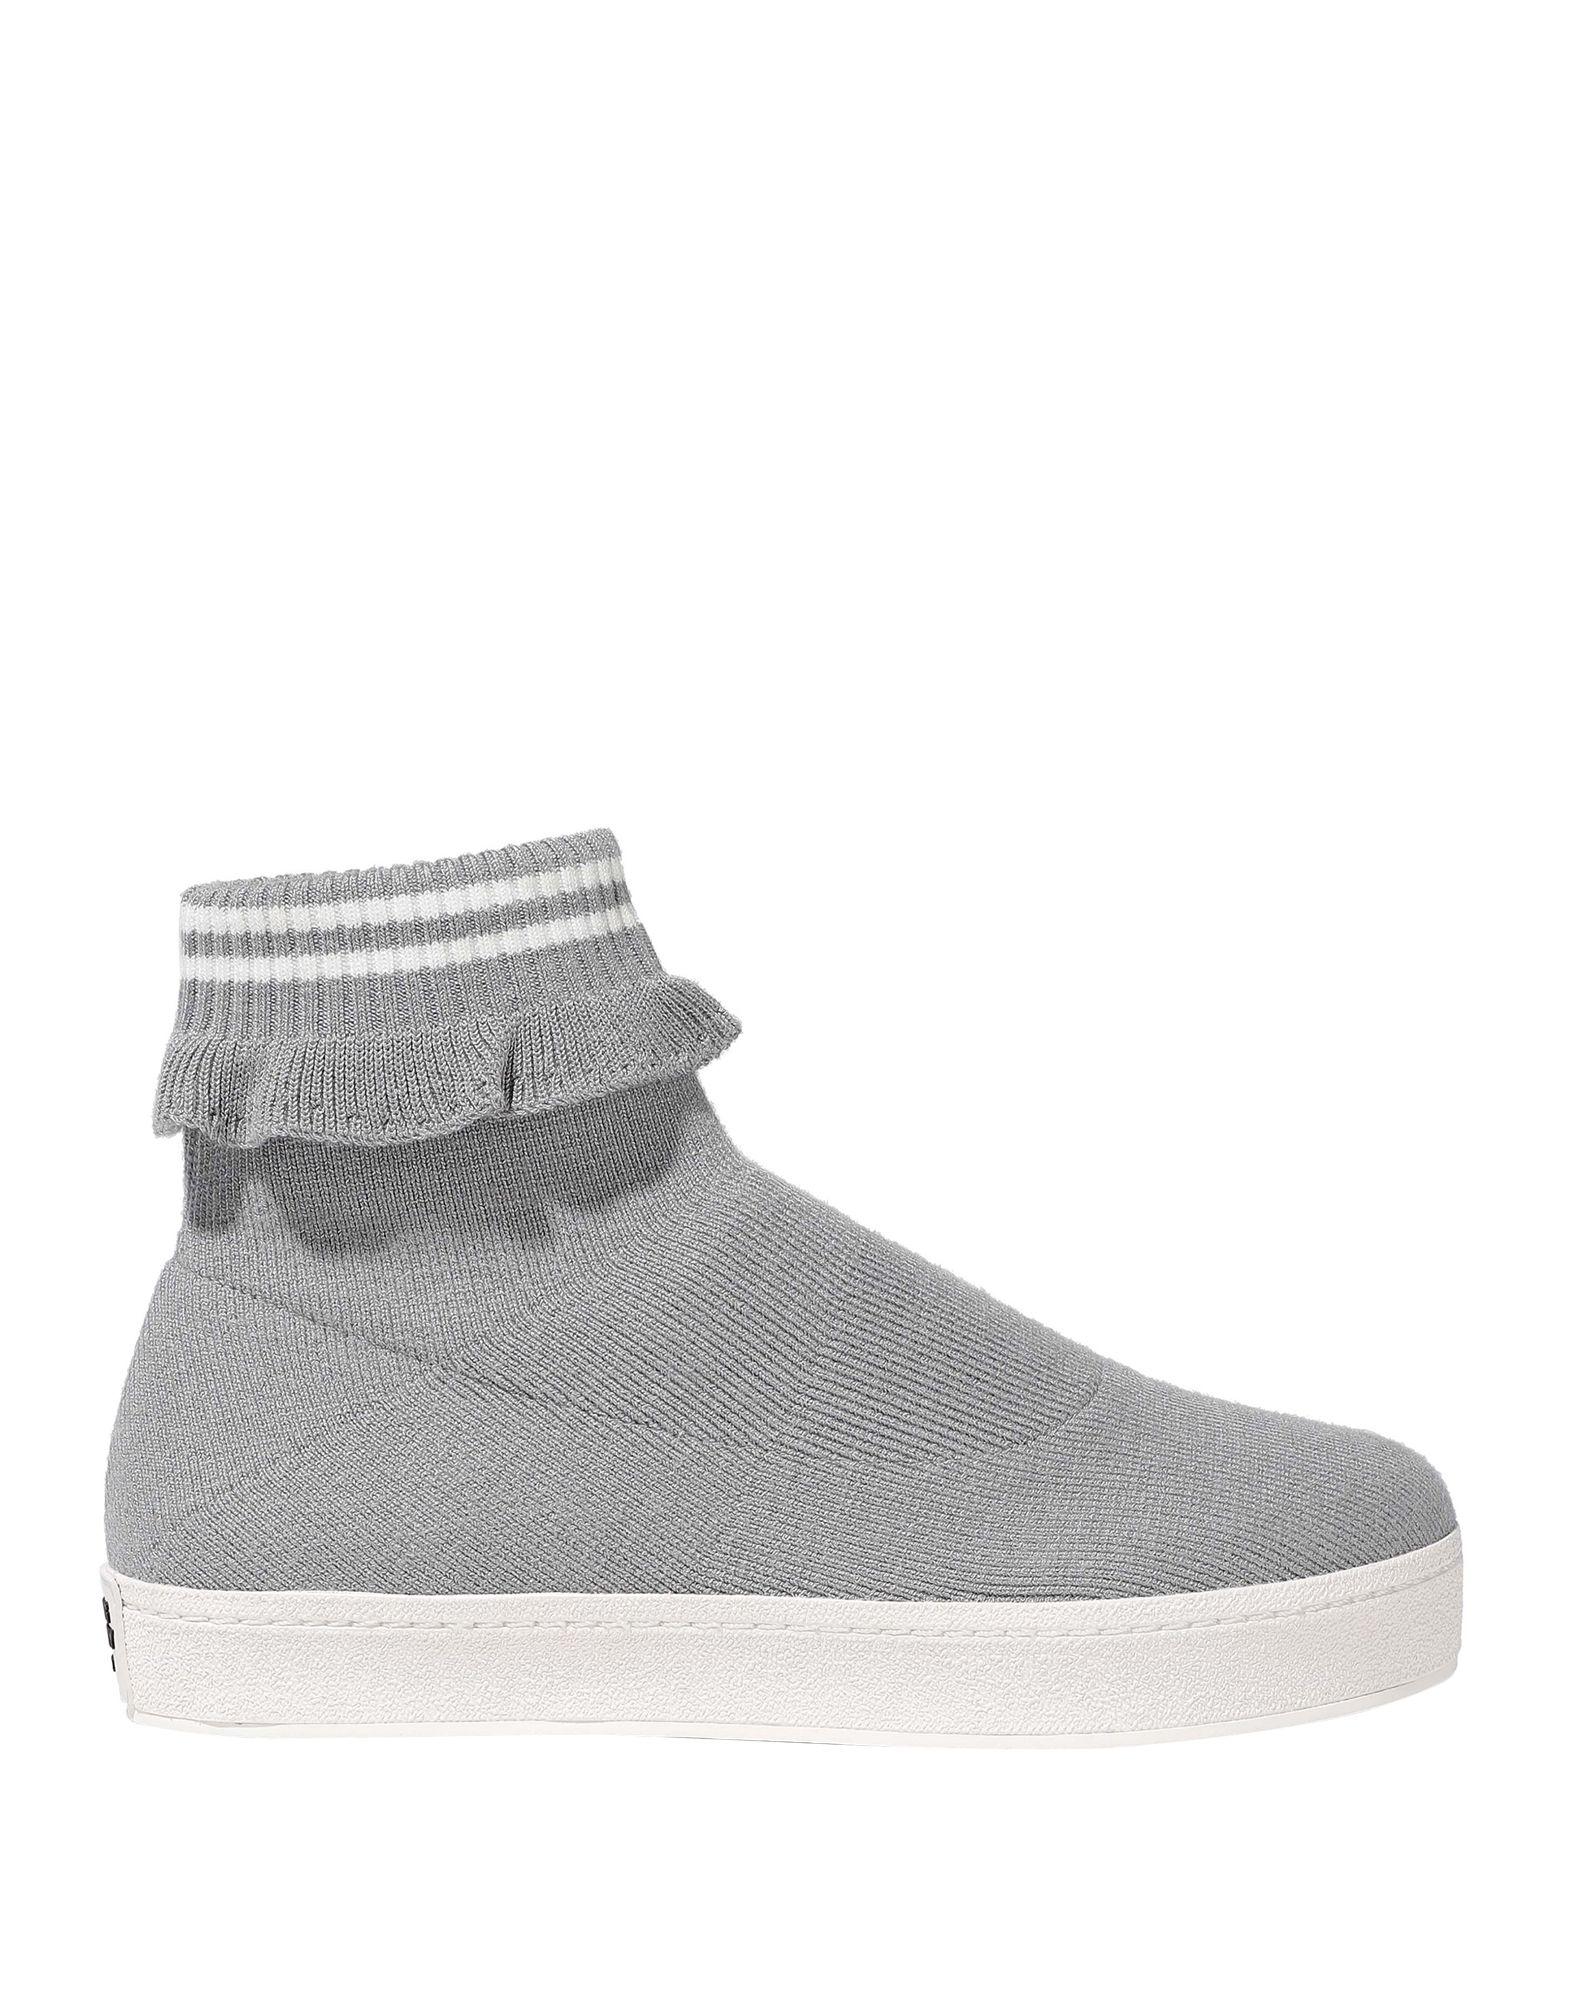 Opening Ceremony High-tops & Sneakers in Grey (Gray) - Lyst